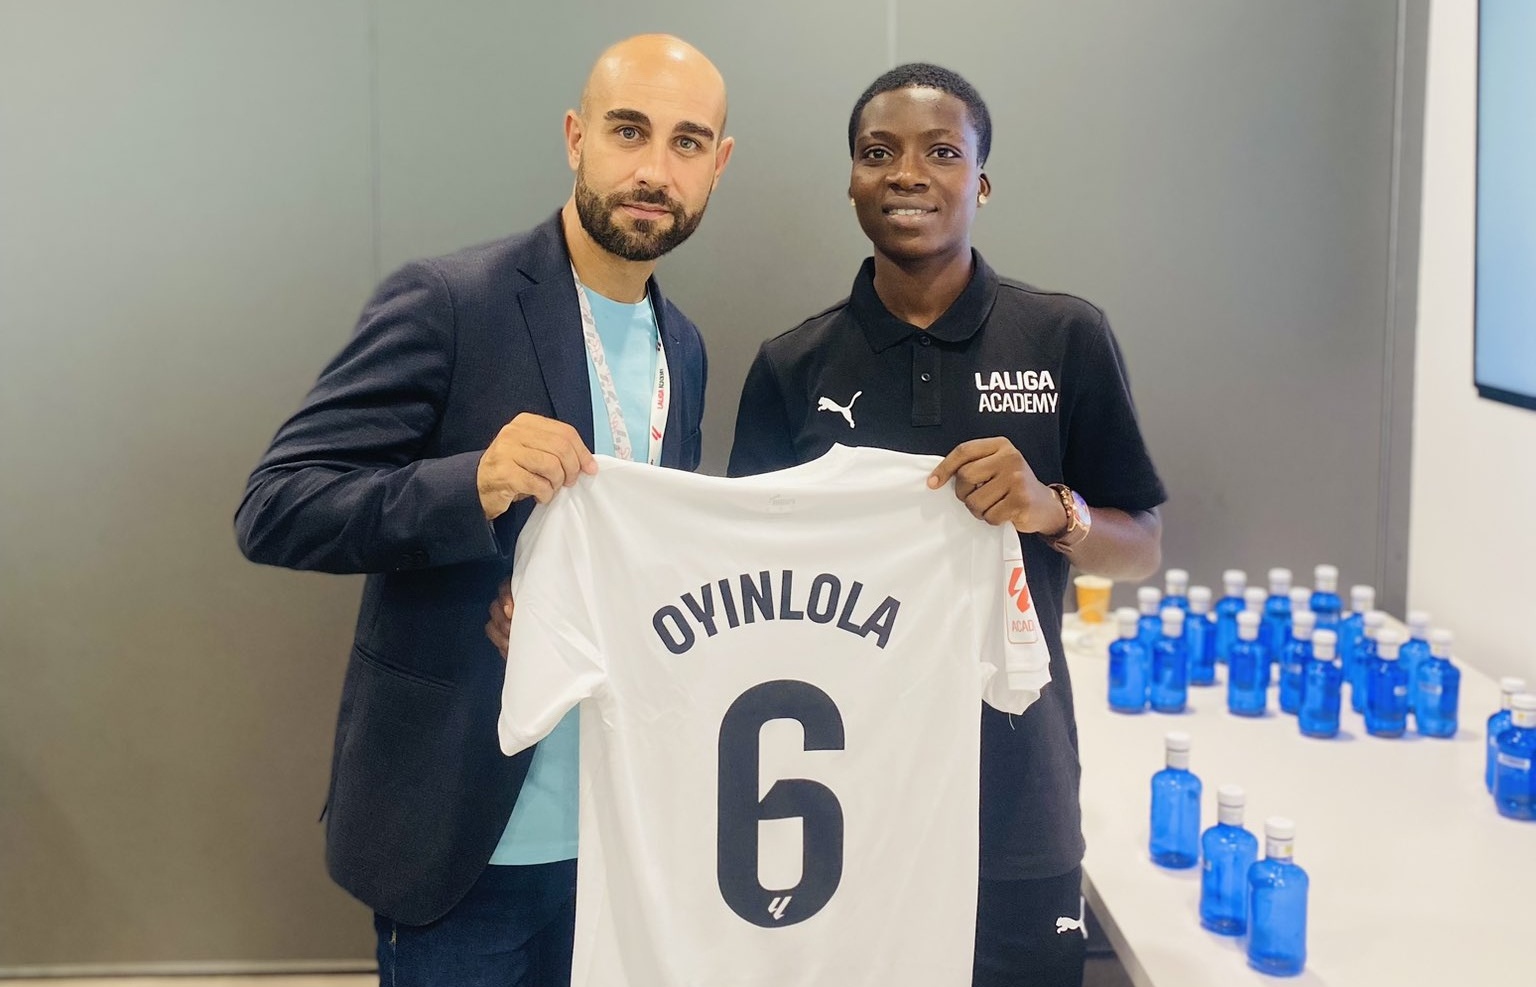 You are currently viewing Olamide Oyinlola joins Laliga Academy in Spain from Naija Ratels